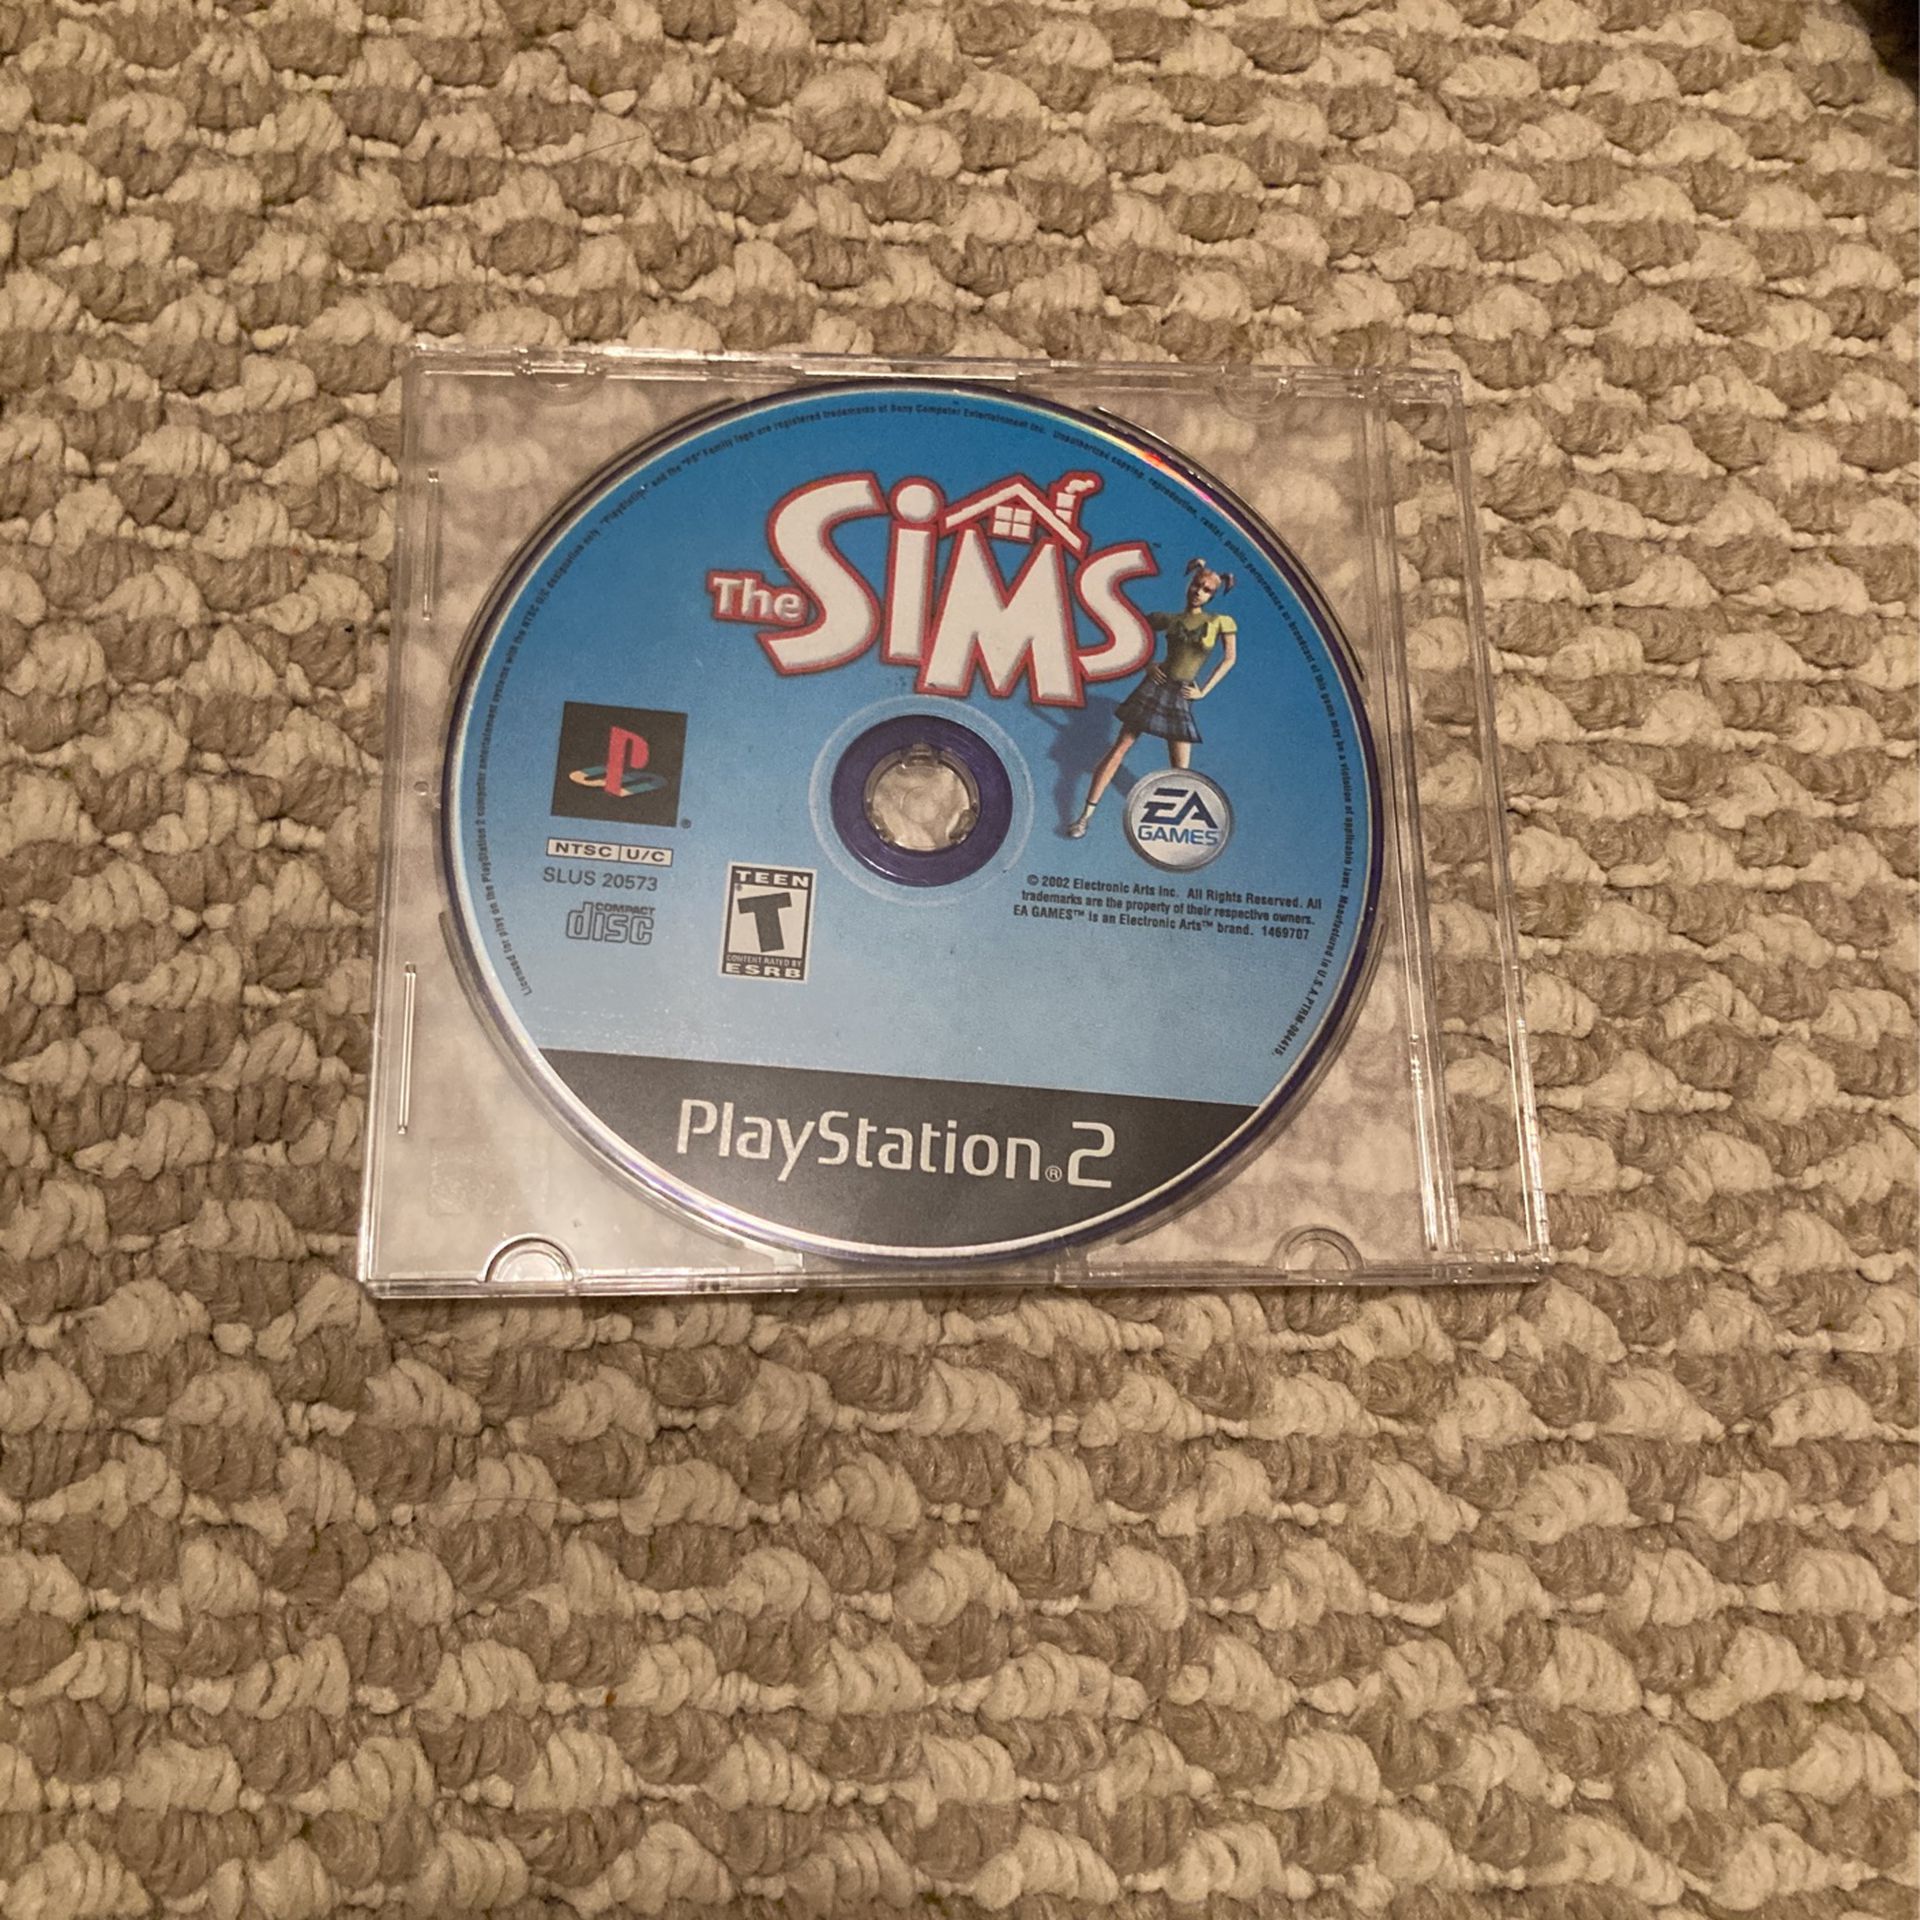 The Sims- PS2